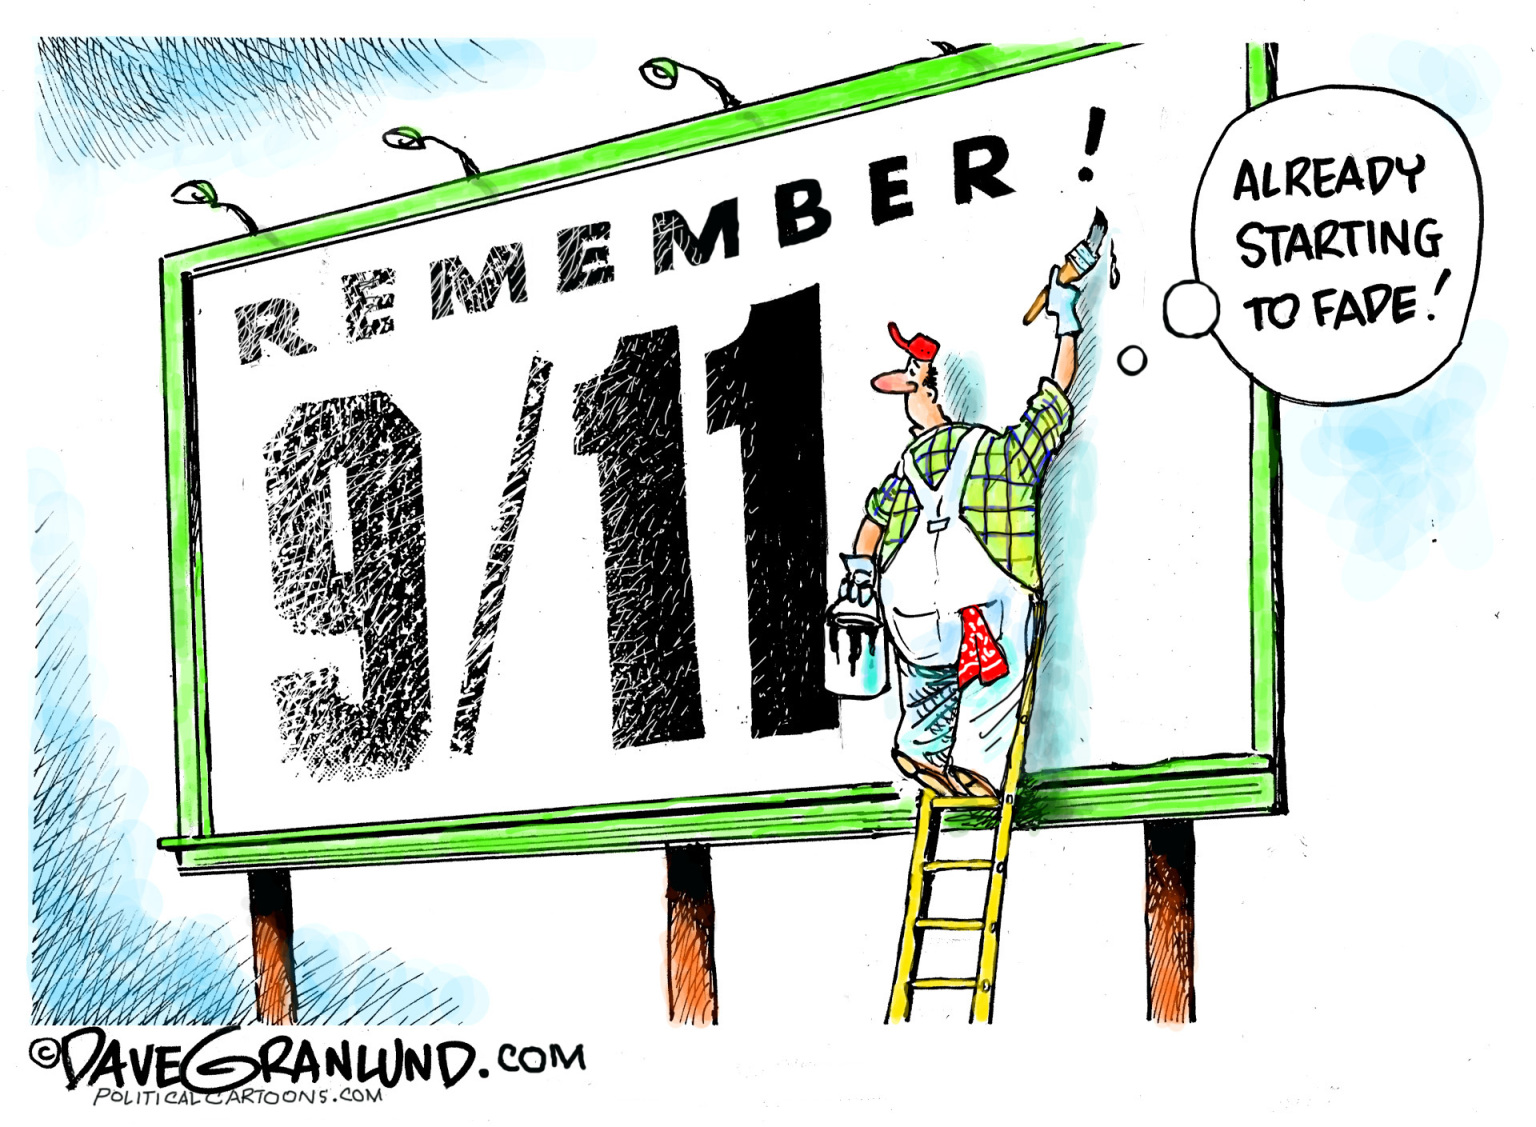 September 11 Fading COLOR - By Dave Granlund